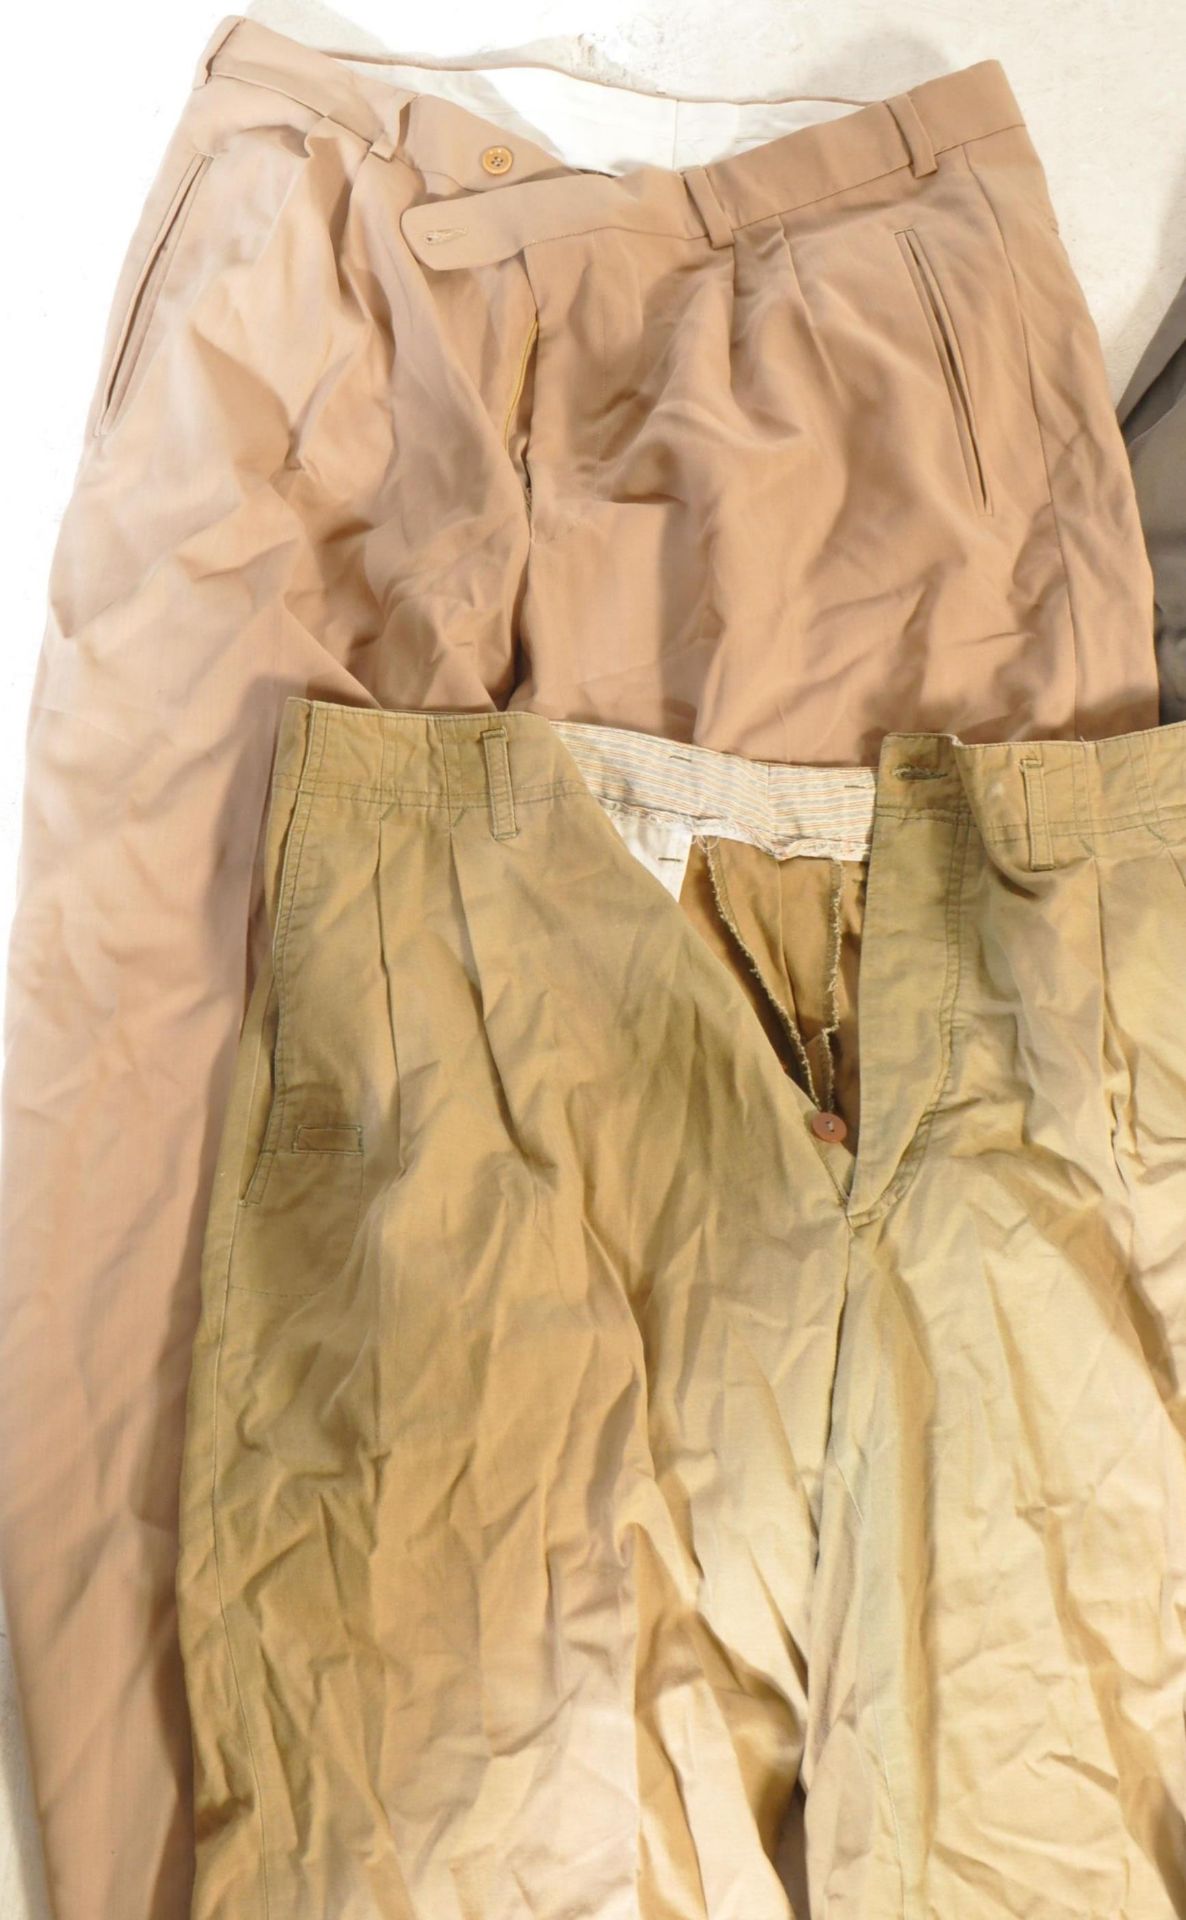 COLLECTION OF VINTAGE DESIGNER GENTS TROUSERS - Image 4 of 7